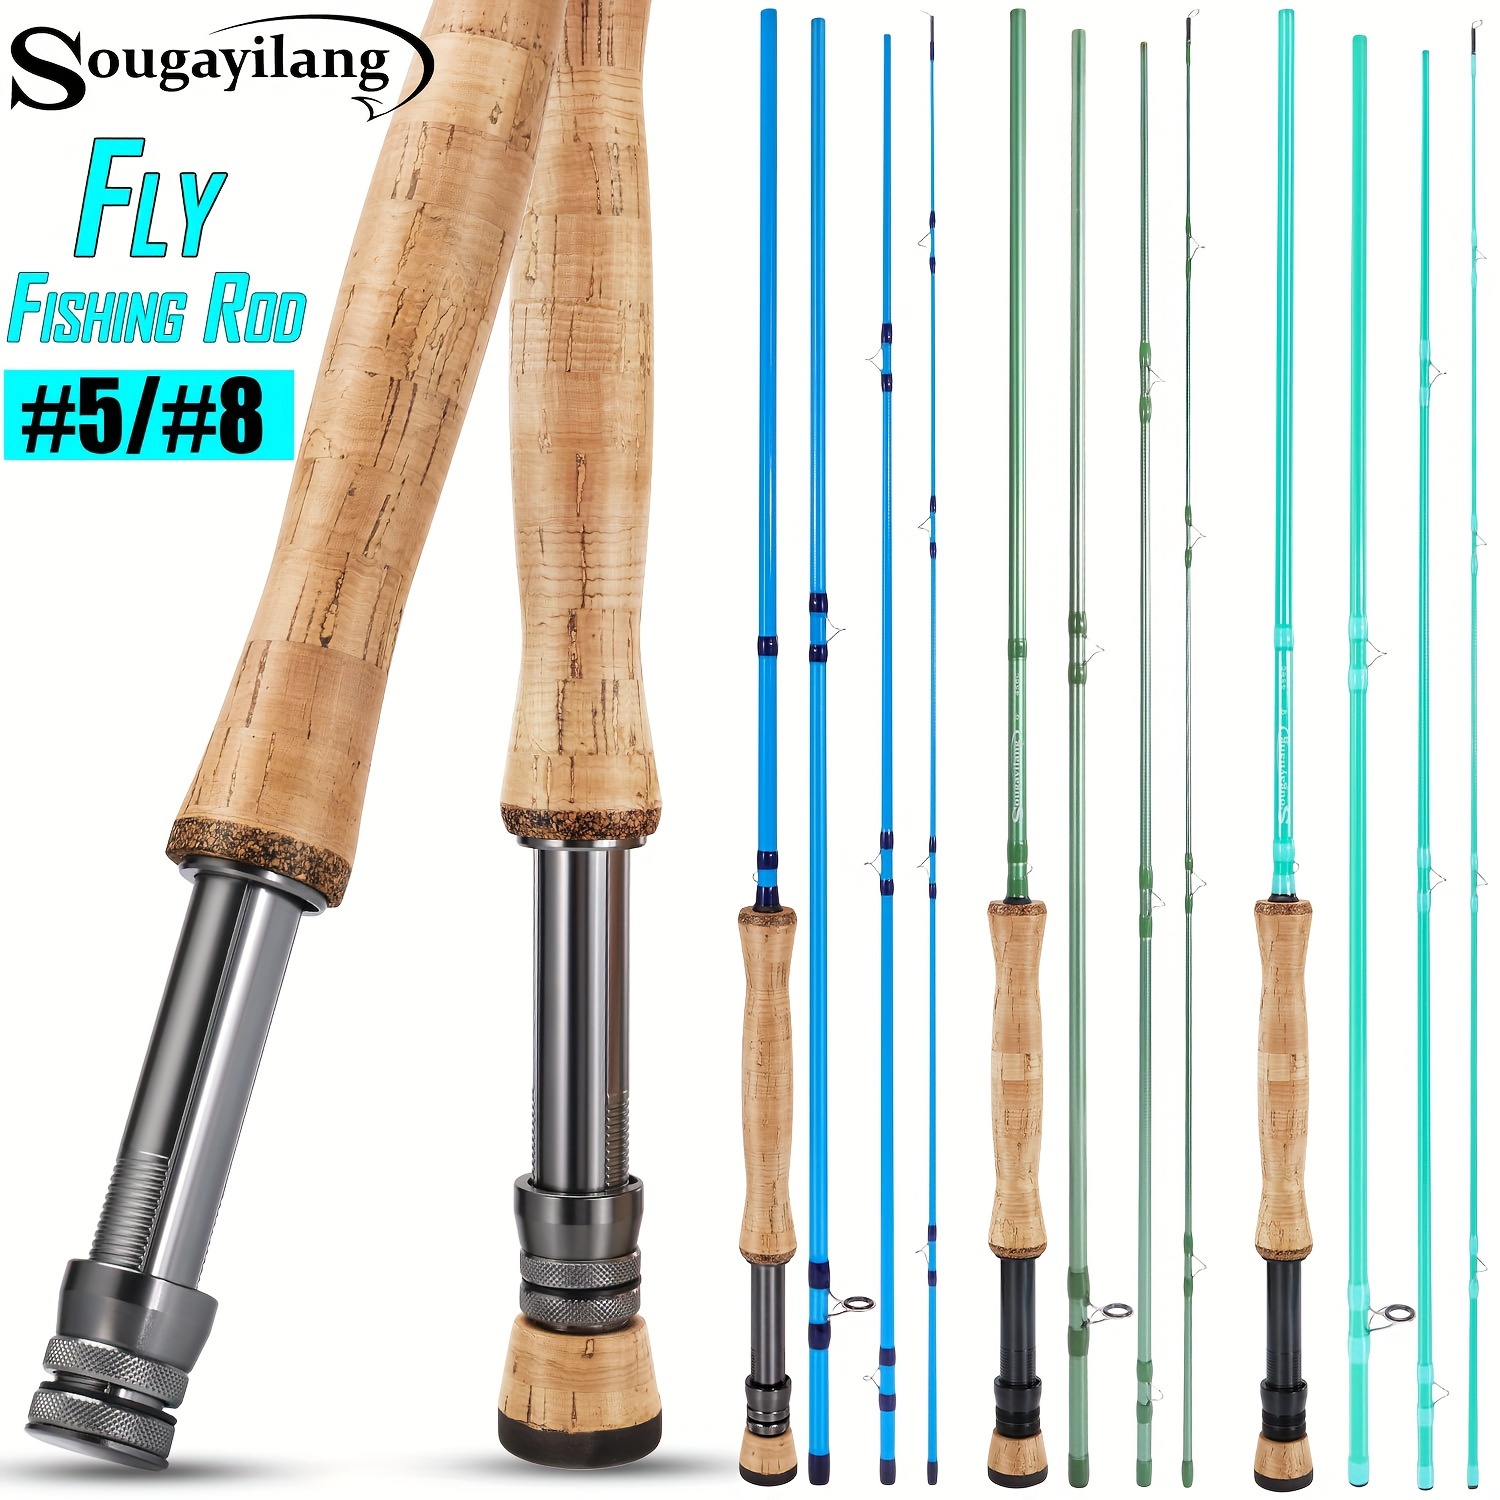 Sougyilang 4 Sections Fly Rod, High Carbon Cloth Rod, Embryo No. 5 No. 8  Rod, Stainless Steel Baked Porcelain Guide Ring Cork Handle Green Blue Cyan  F